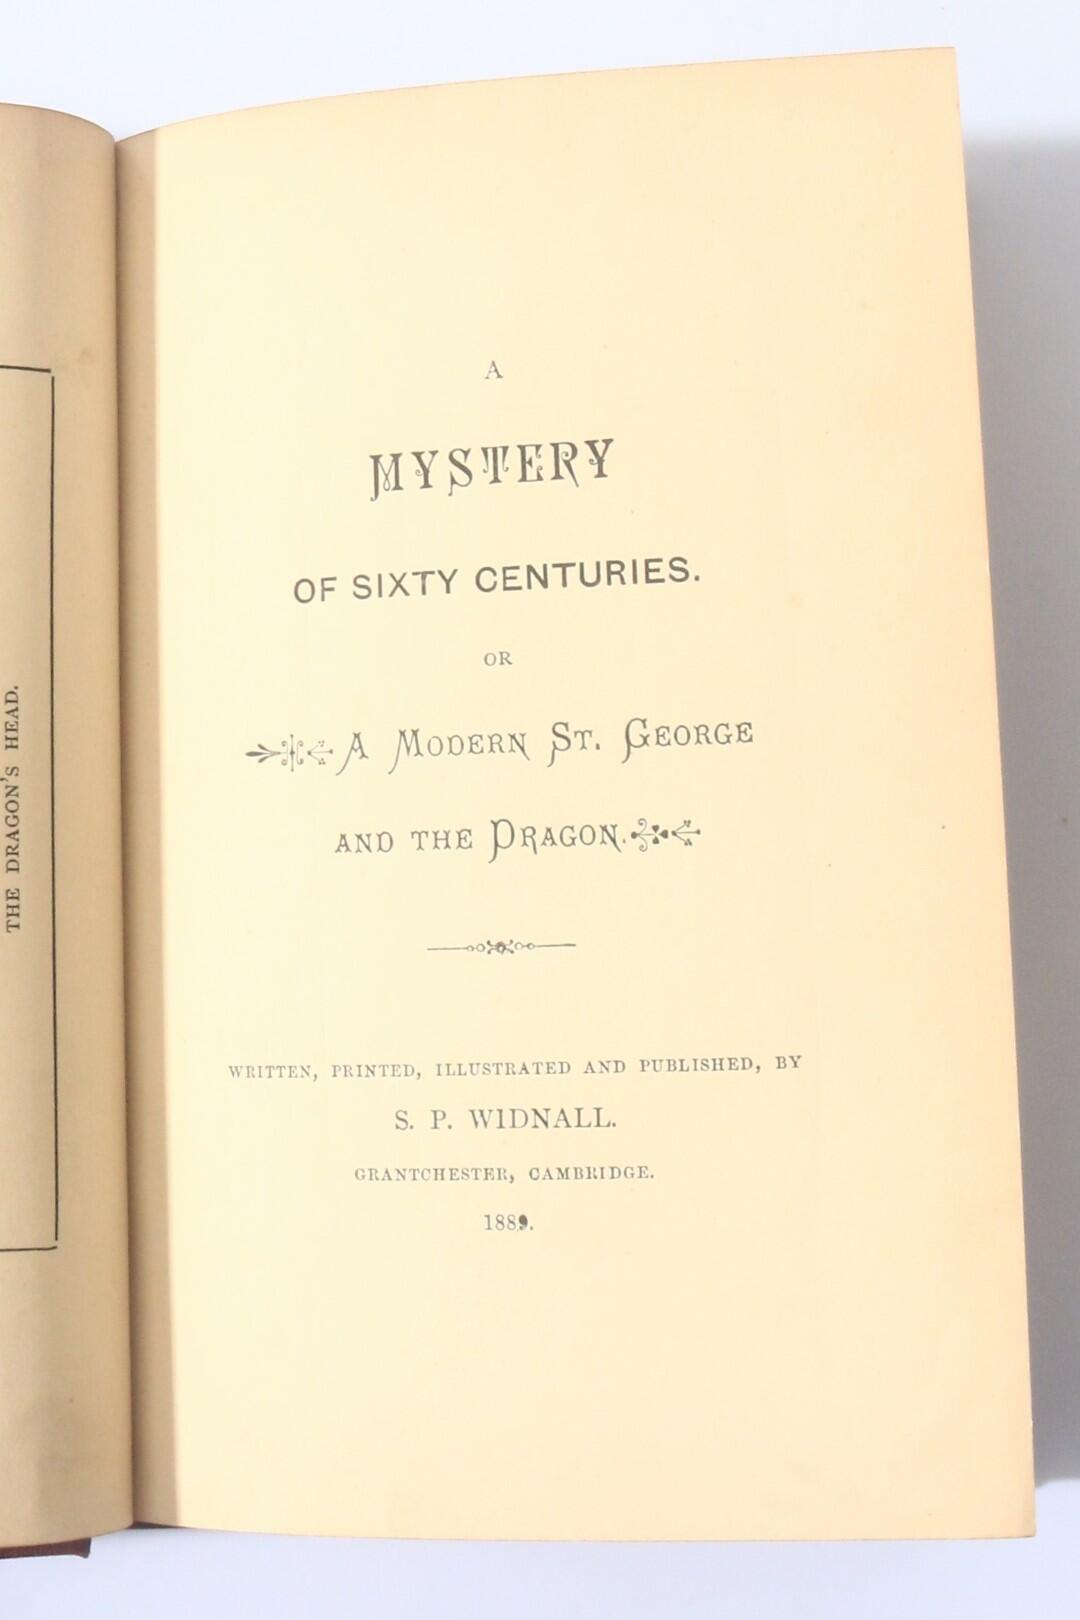 S.P. Widnall [Samuel Page] - A Mystery of Sixty Centuries, a Modern St. George and the Dragon - Privately Printed, 1889, First Edition.